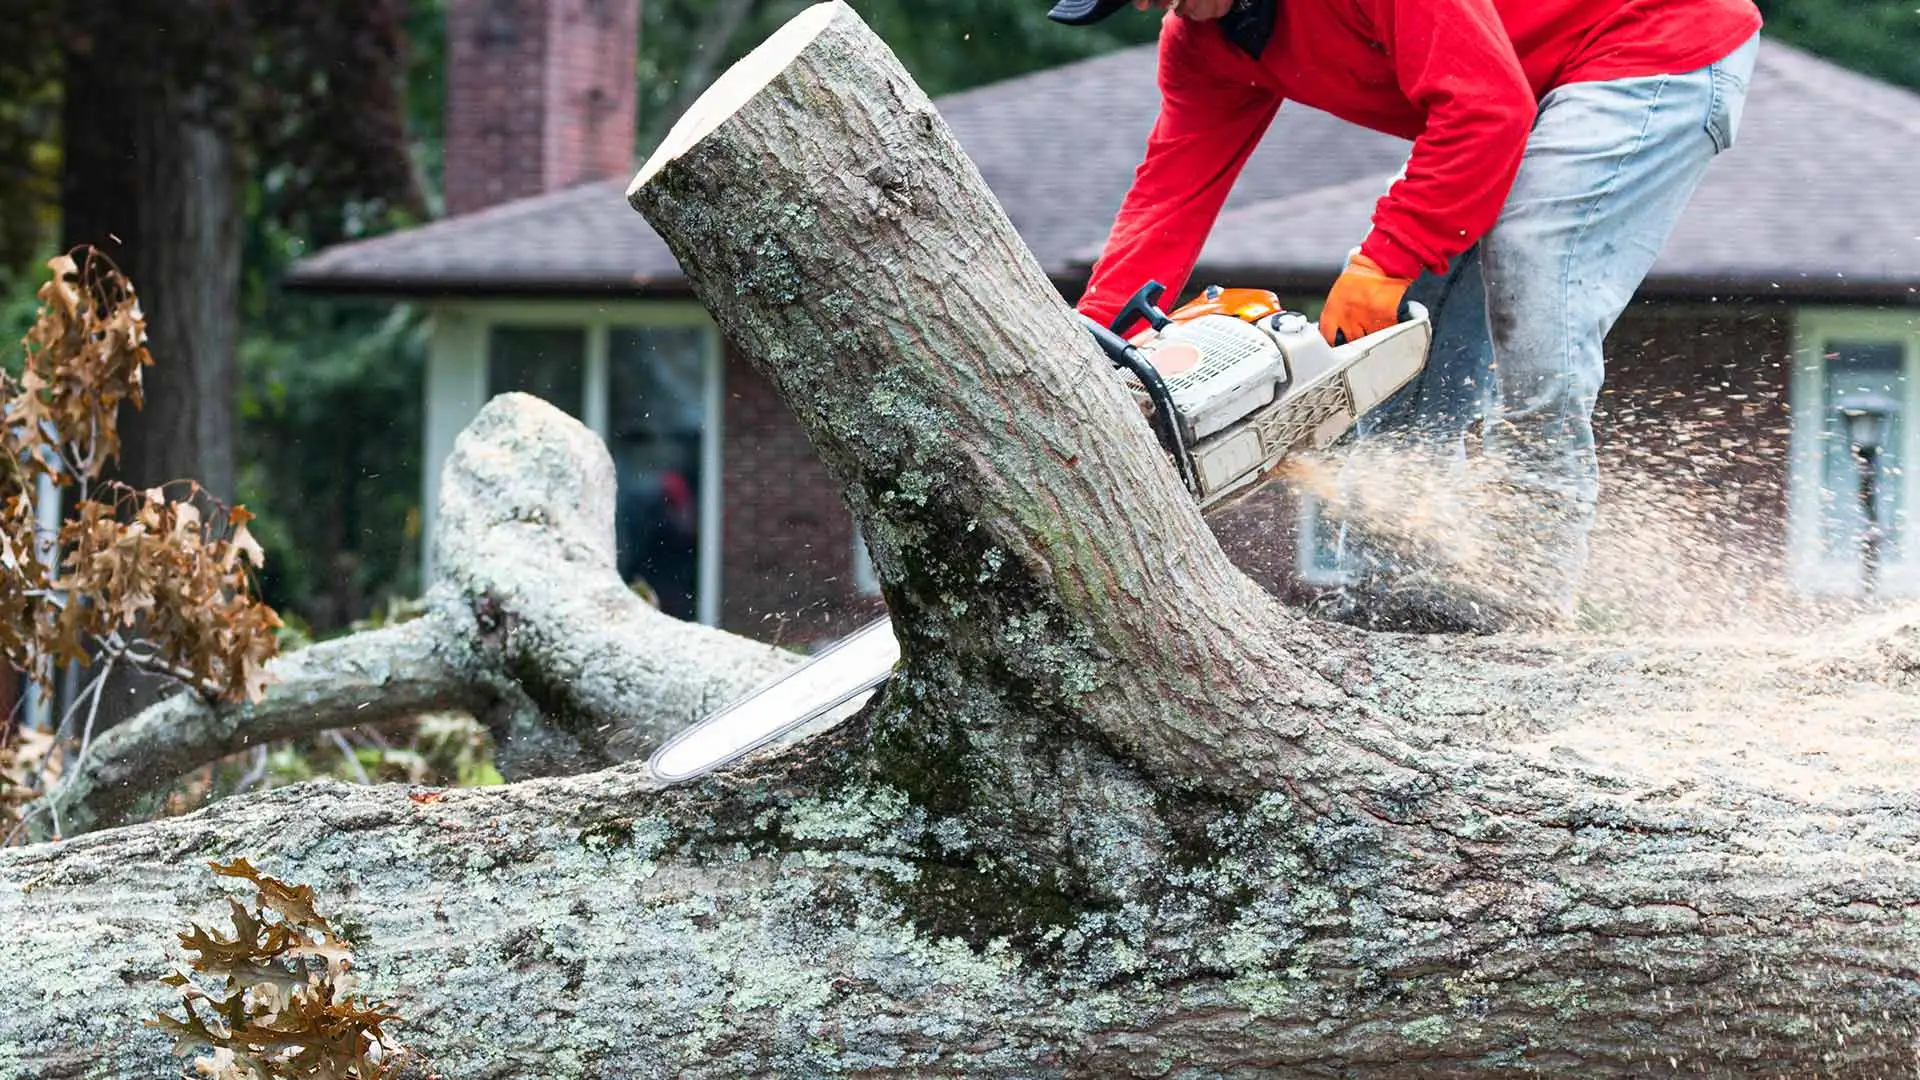 Expert cutting apart a chopped down tree one piece at a time near Tampa, FL.